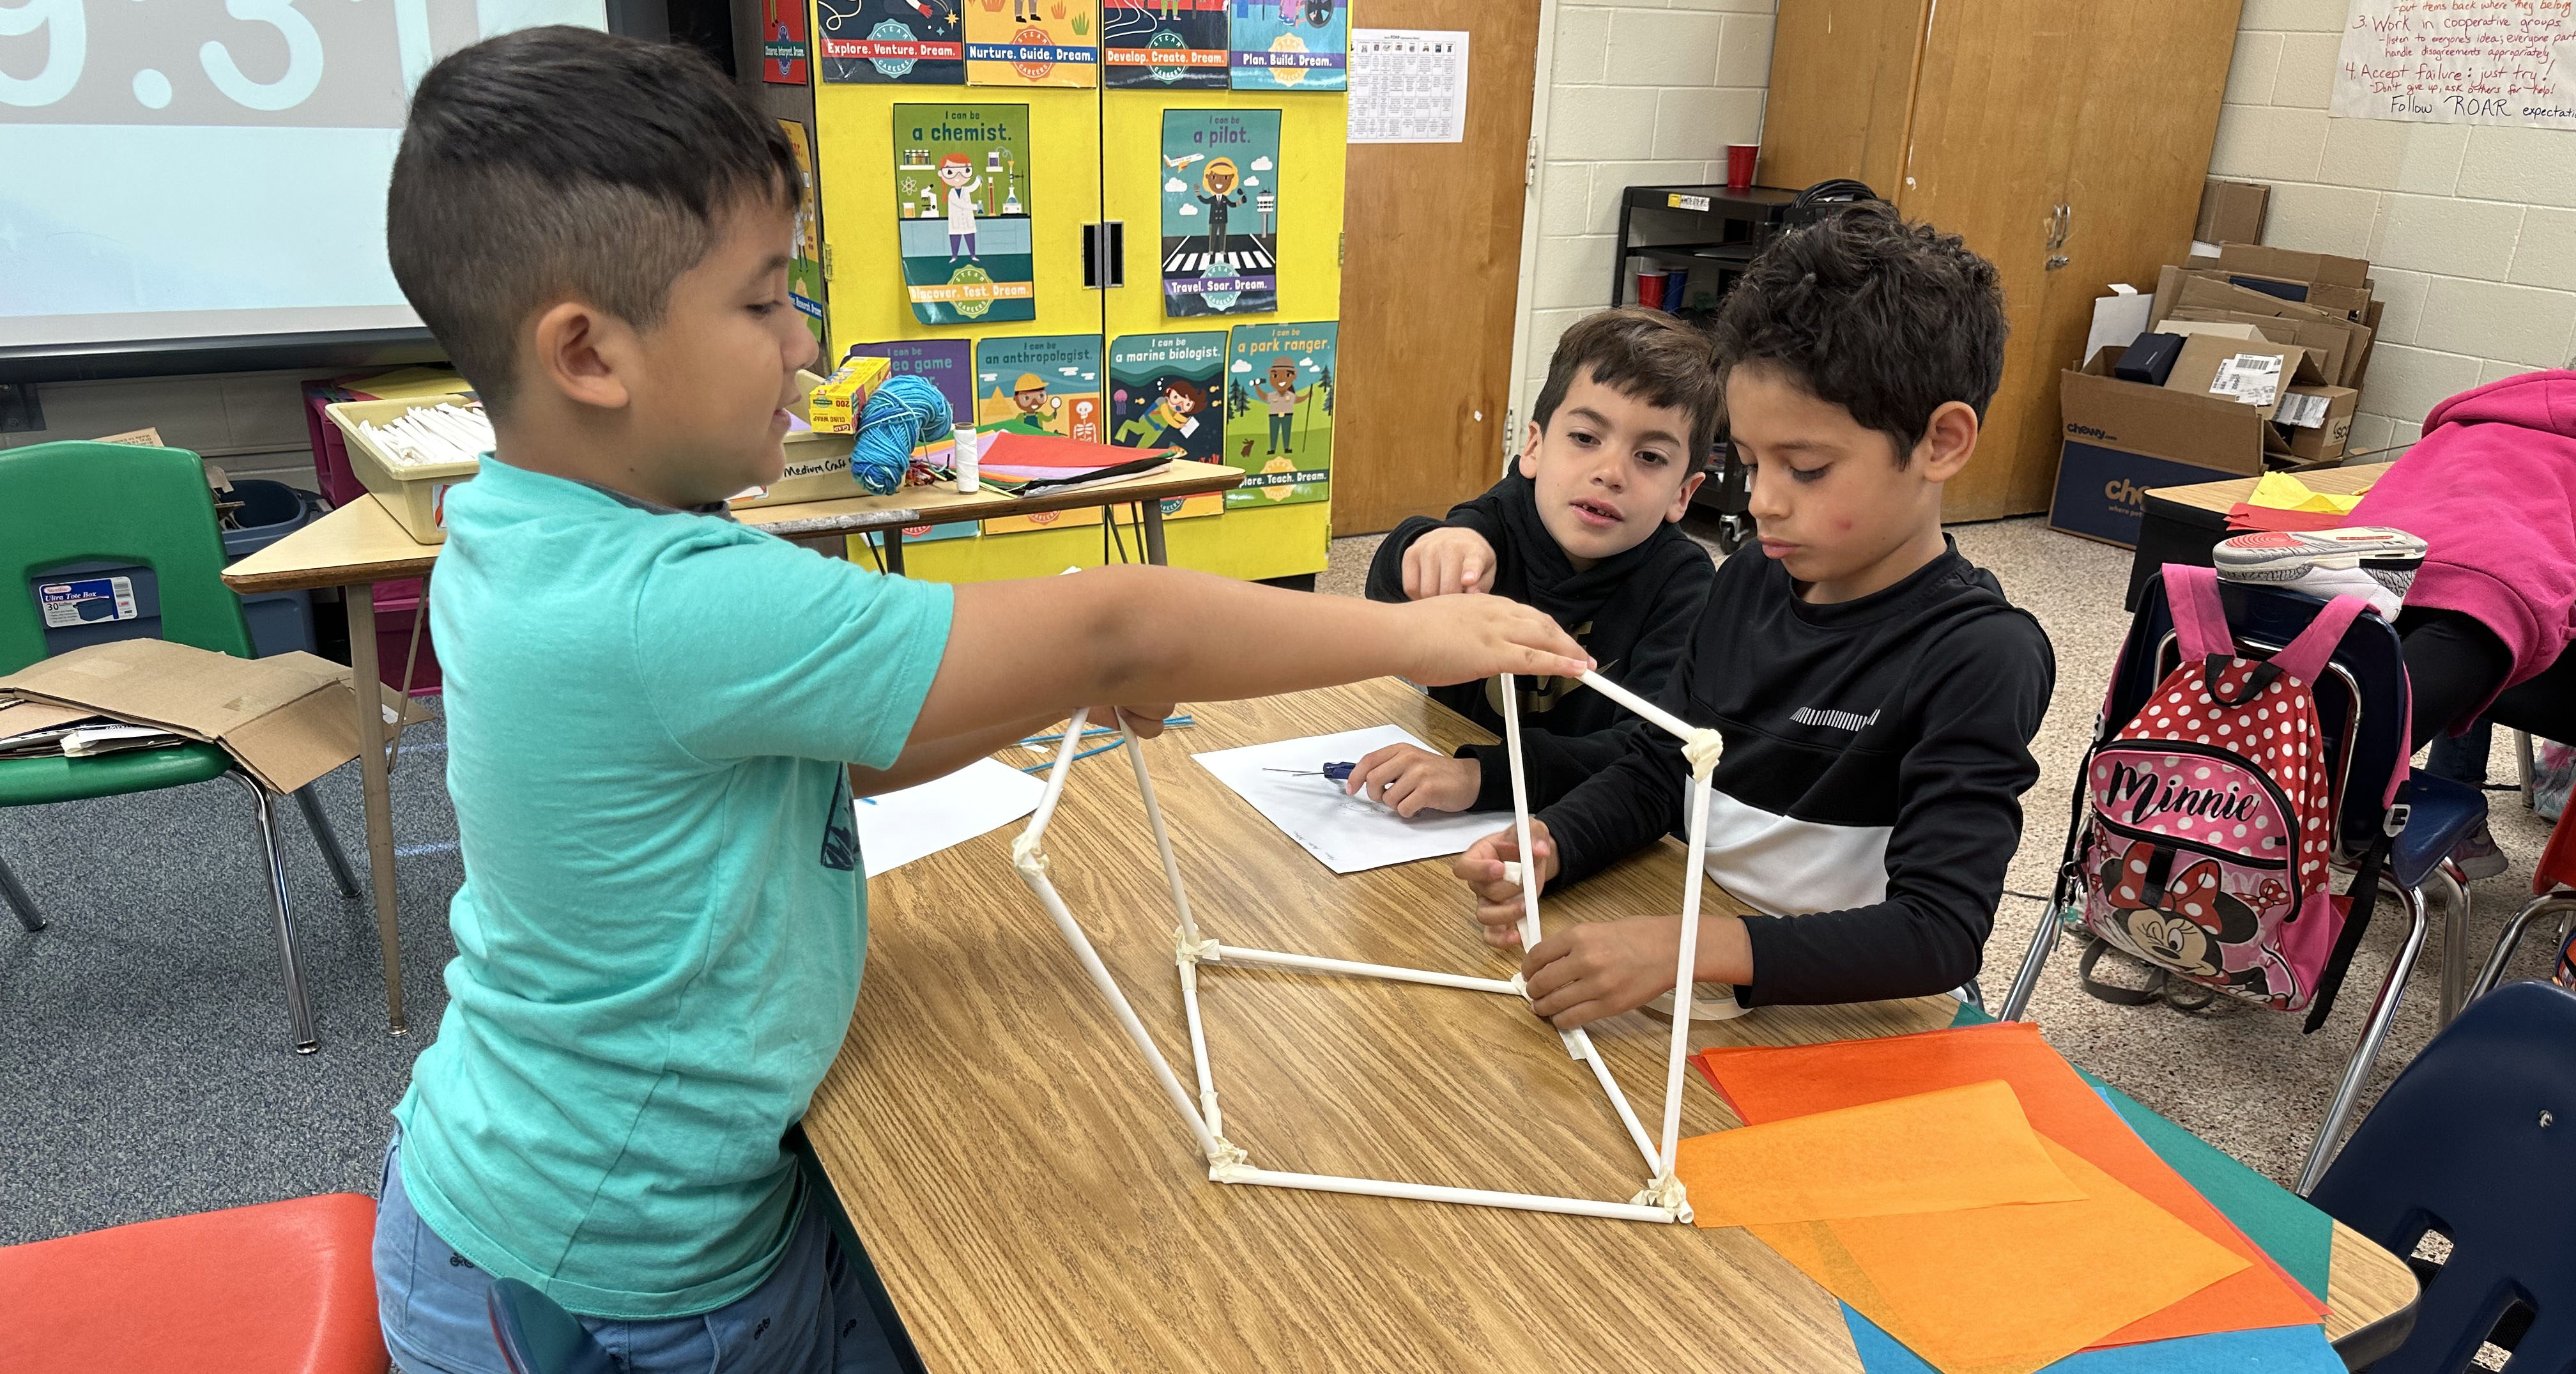 Three students are working on building a structure with straws